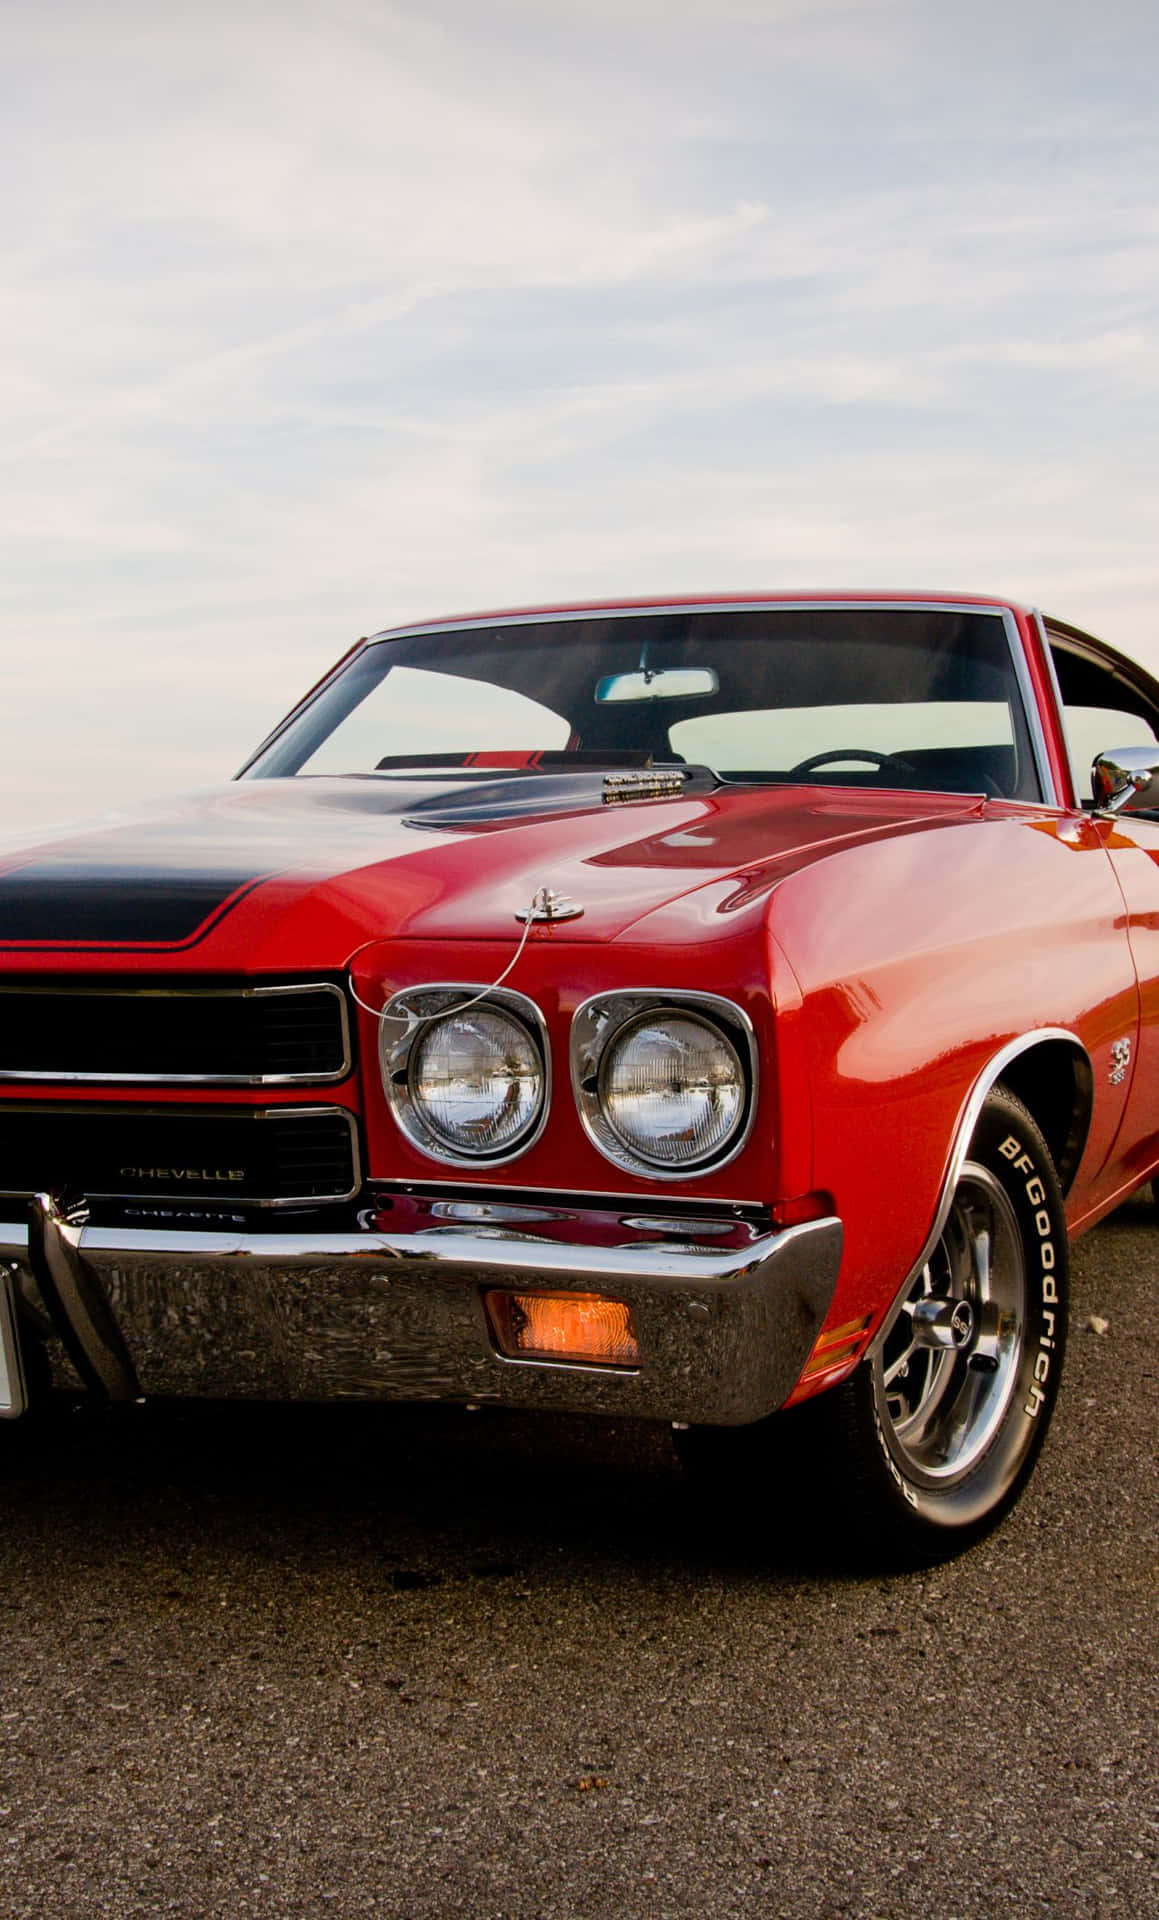 Classic Red Chevrolet Chevelle Car Iphone Wallpaper